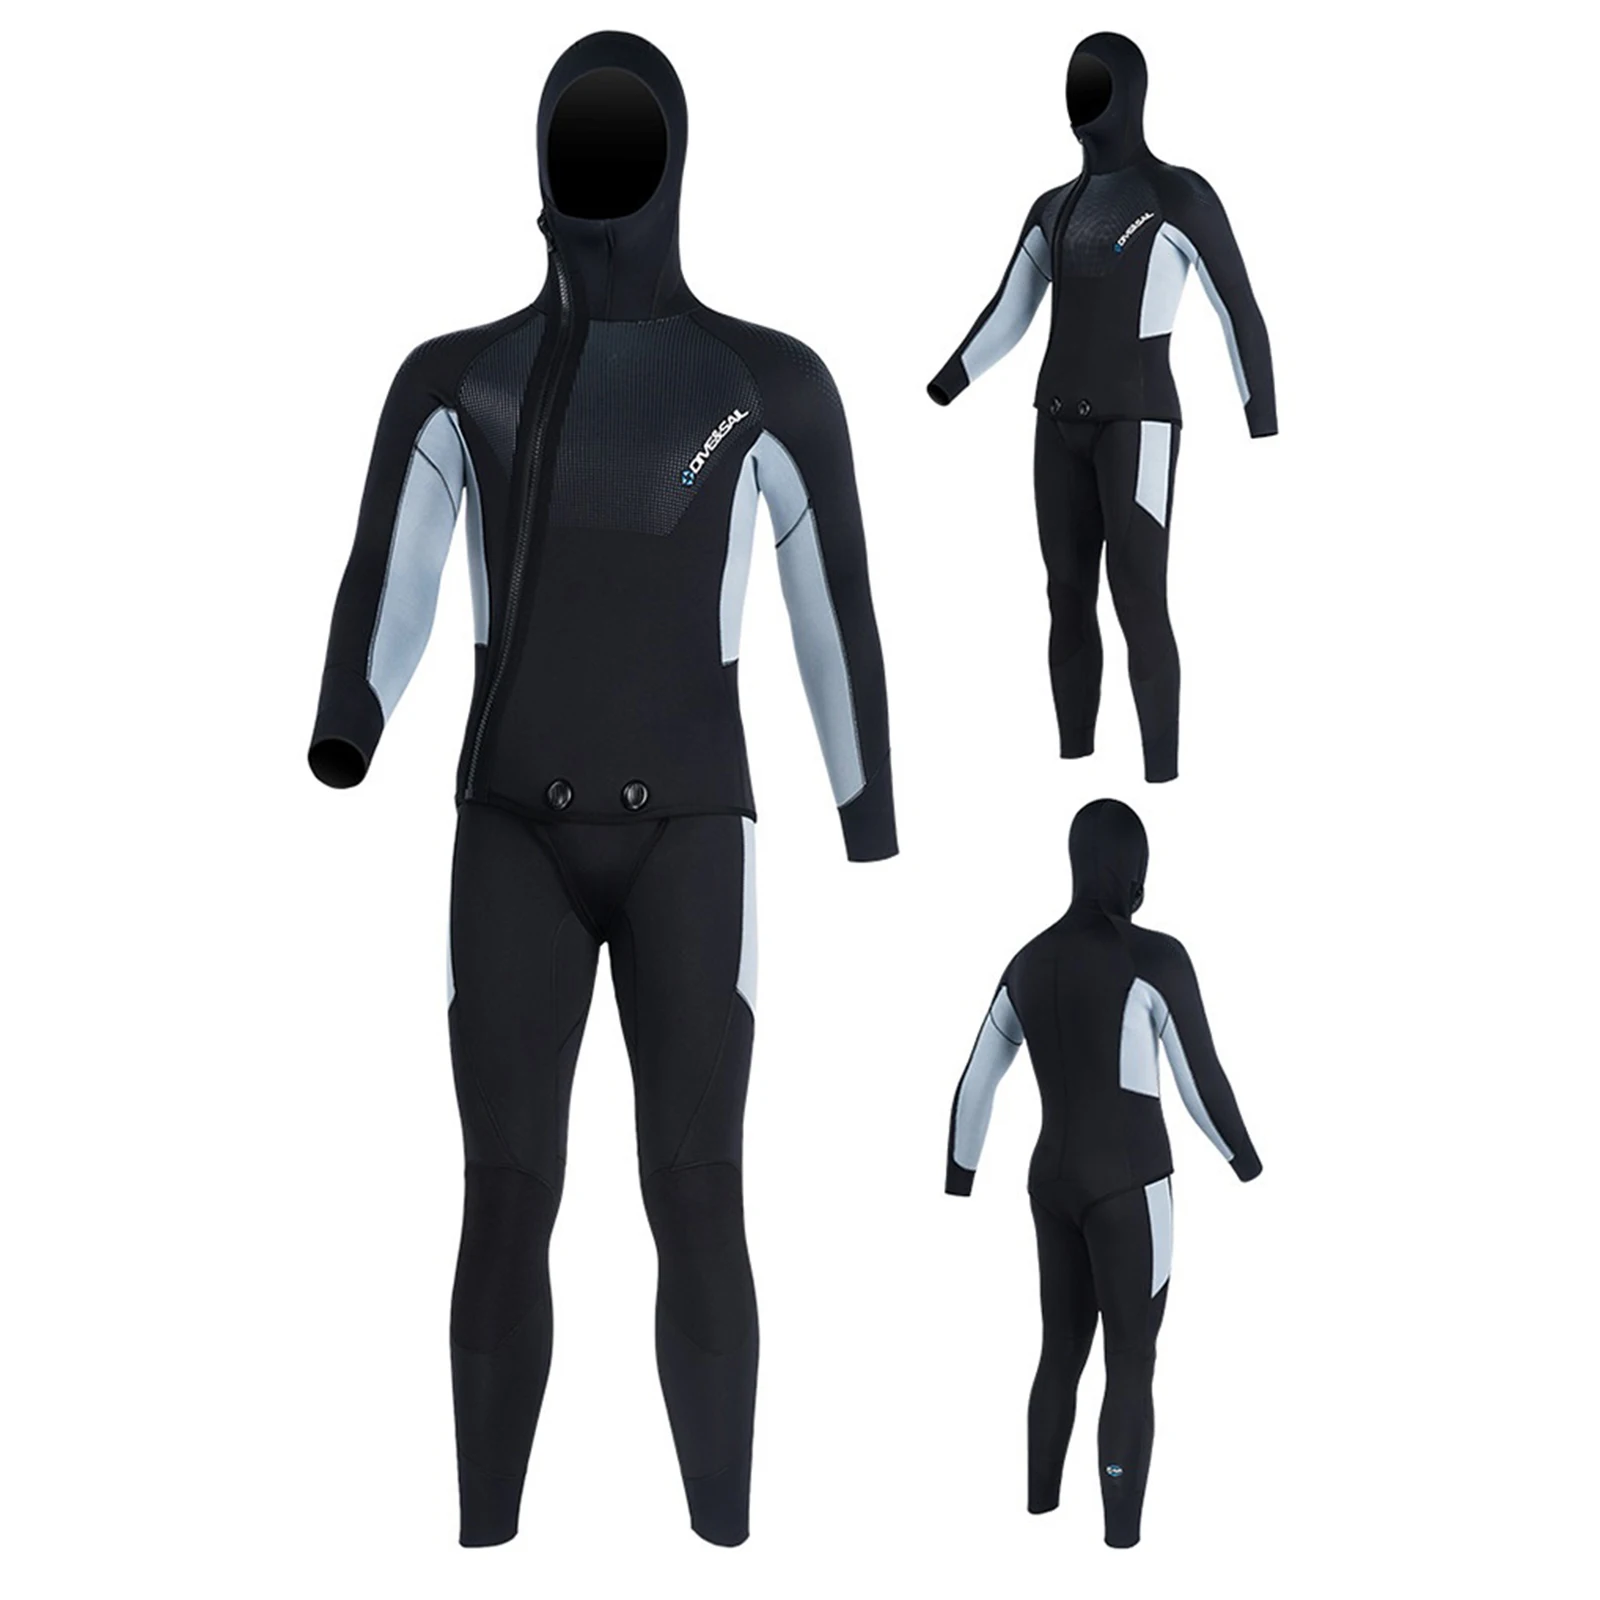 Mens Diver Diving Suit 5mm Neoprene Diving Equipment Long Sleeve Swimsuit Man Swimwear for Spearfishing Water Sports Surfing